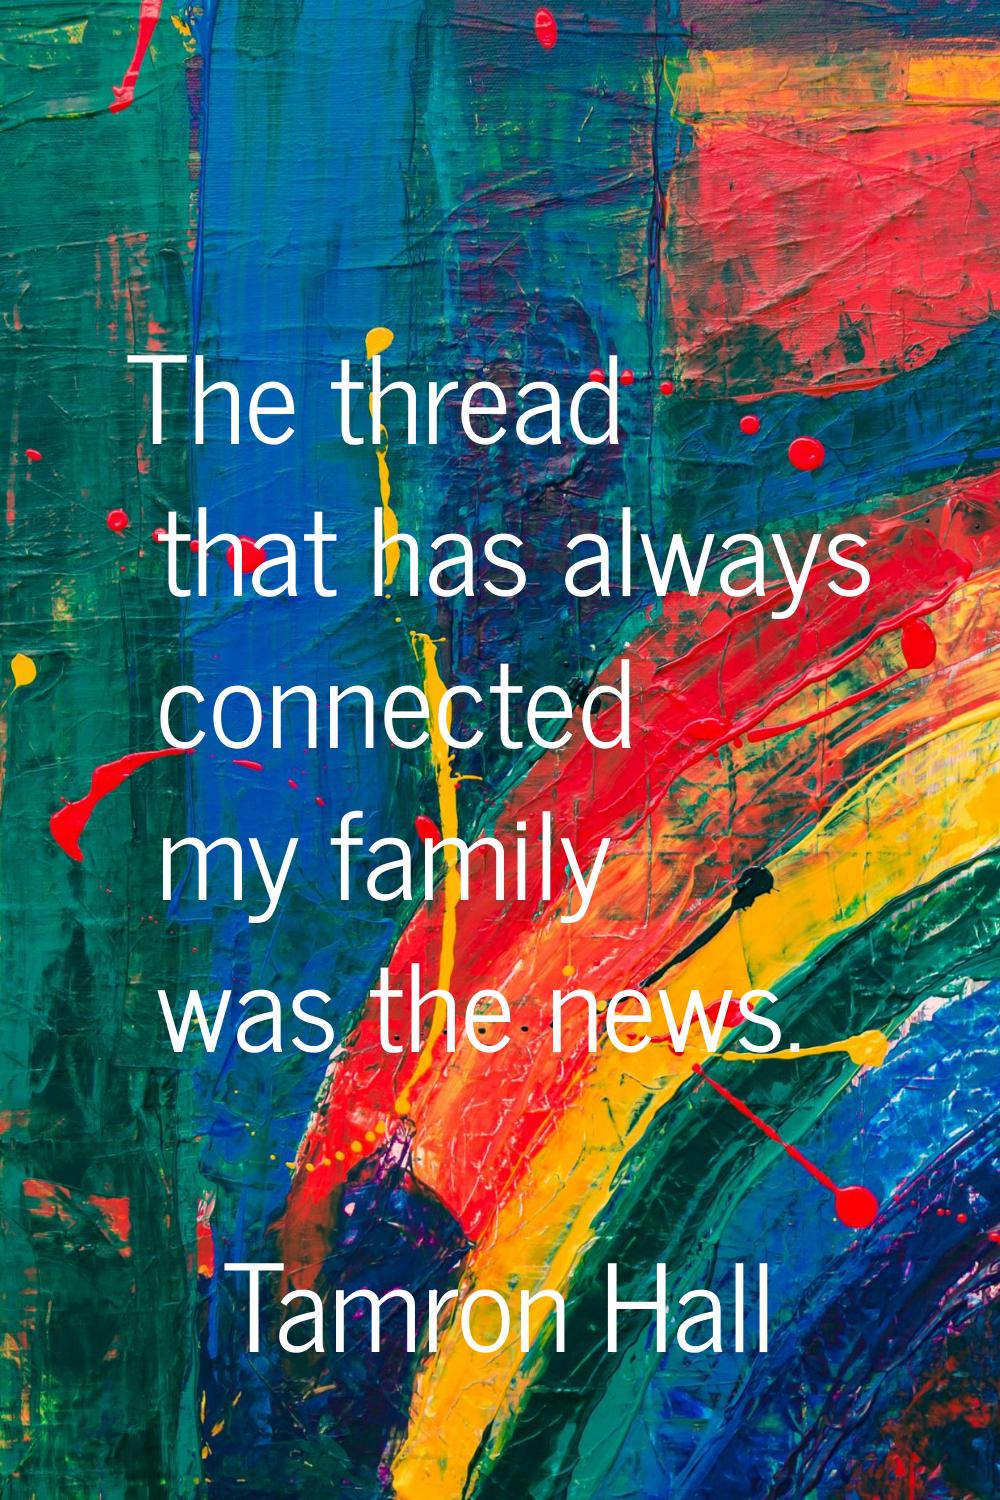 The thread that has always connected my family was the news.